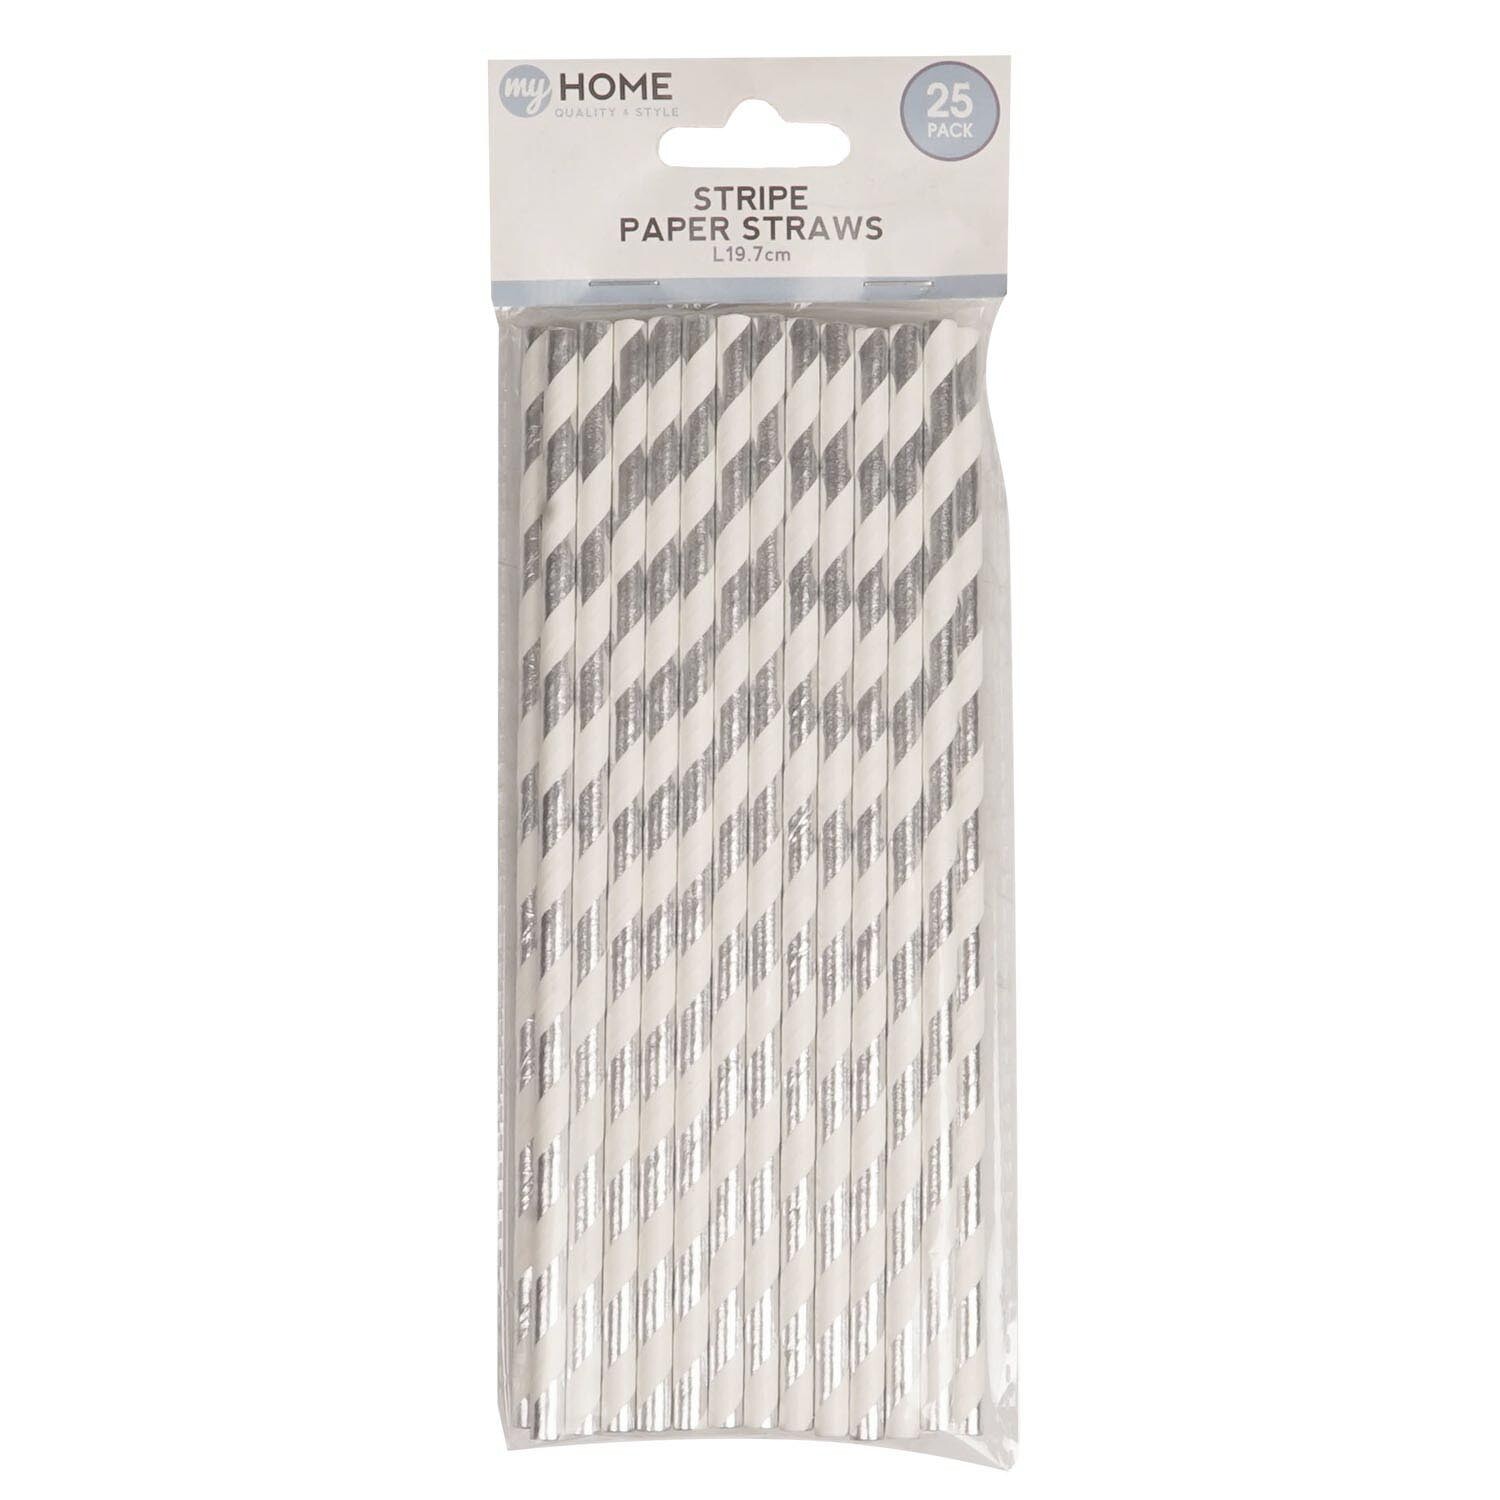 Pack of 25 Striped Paper Straws Image 2